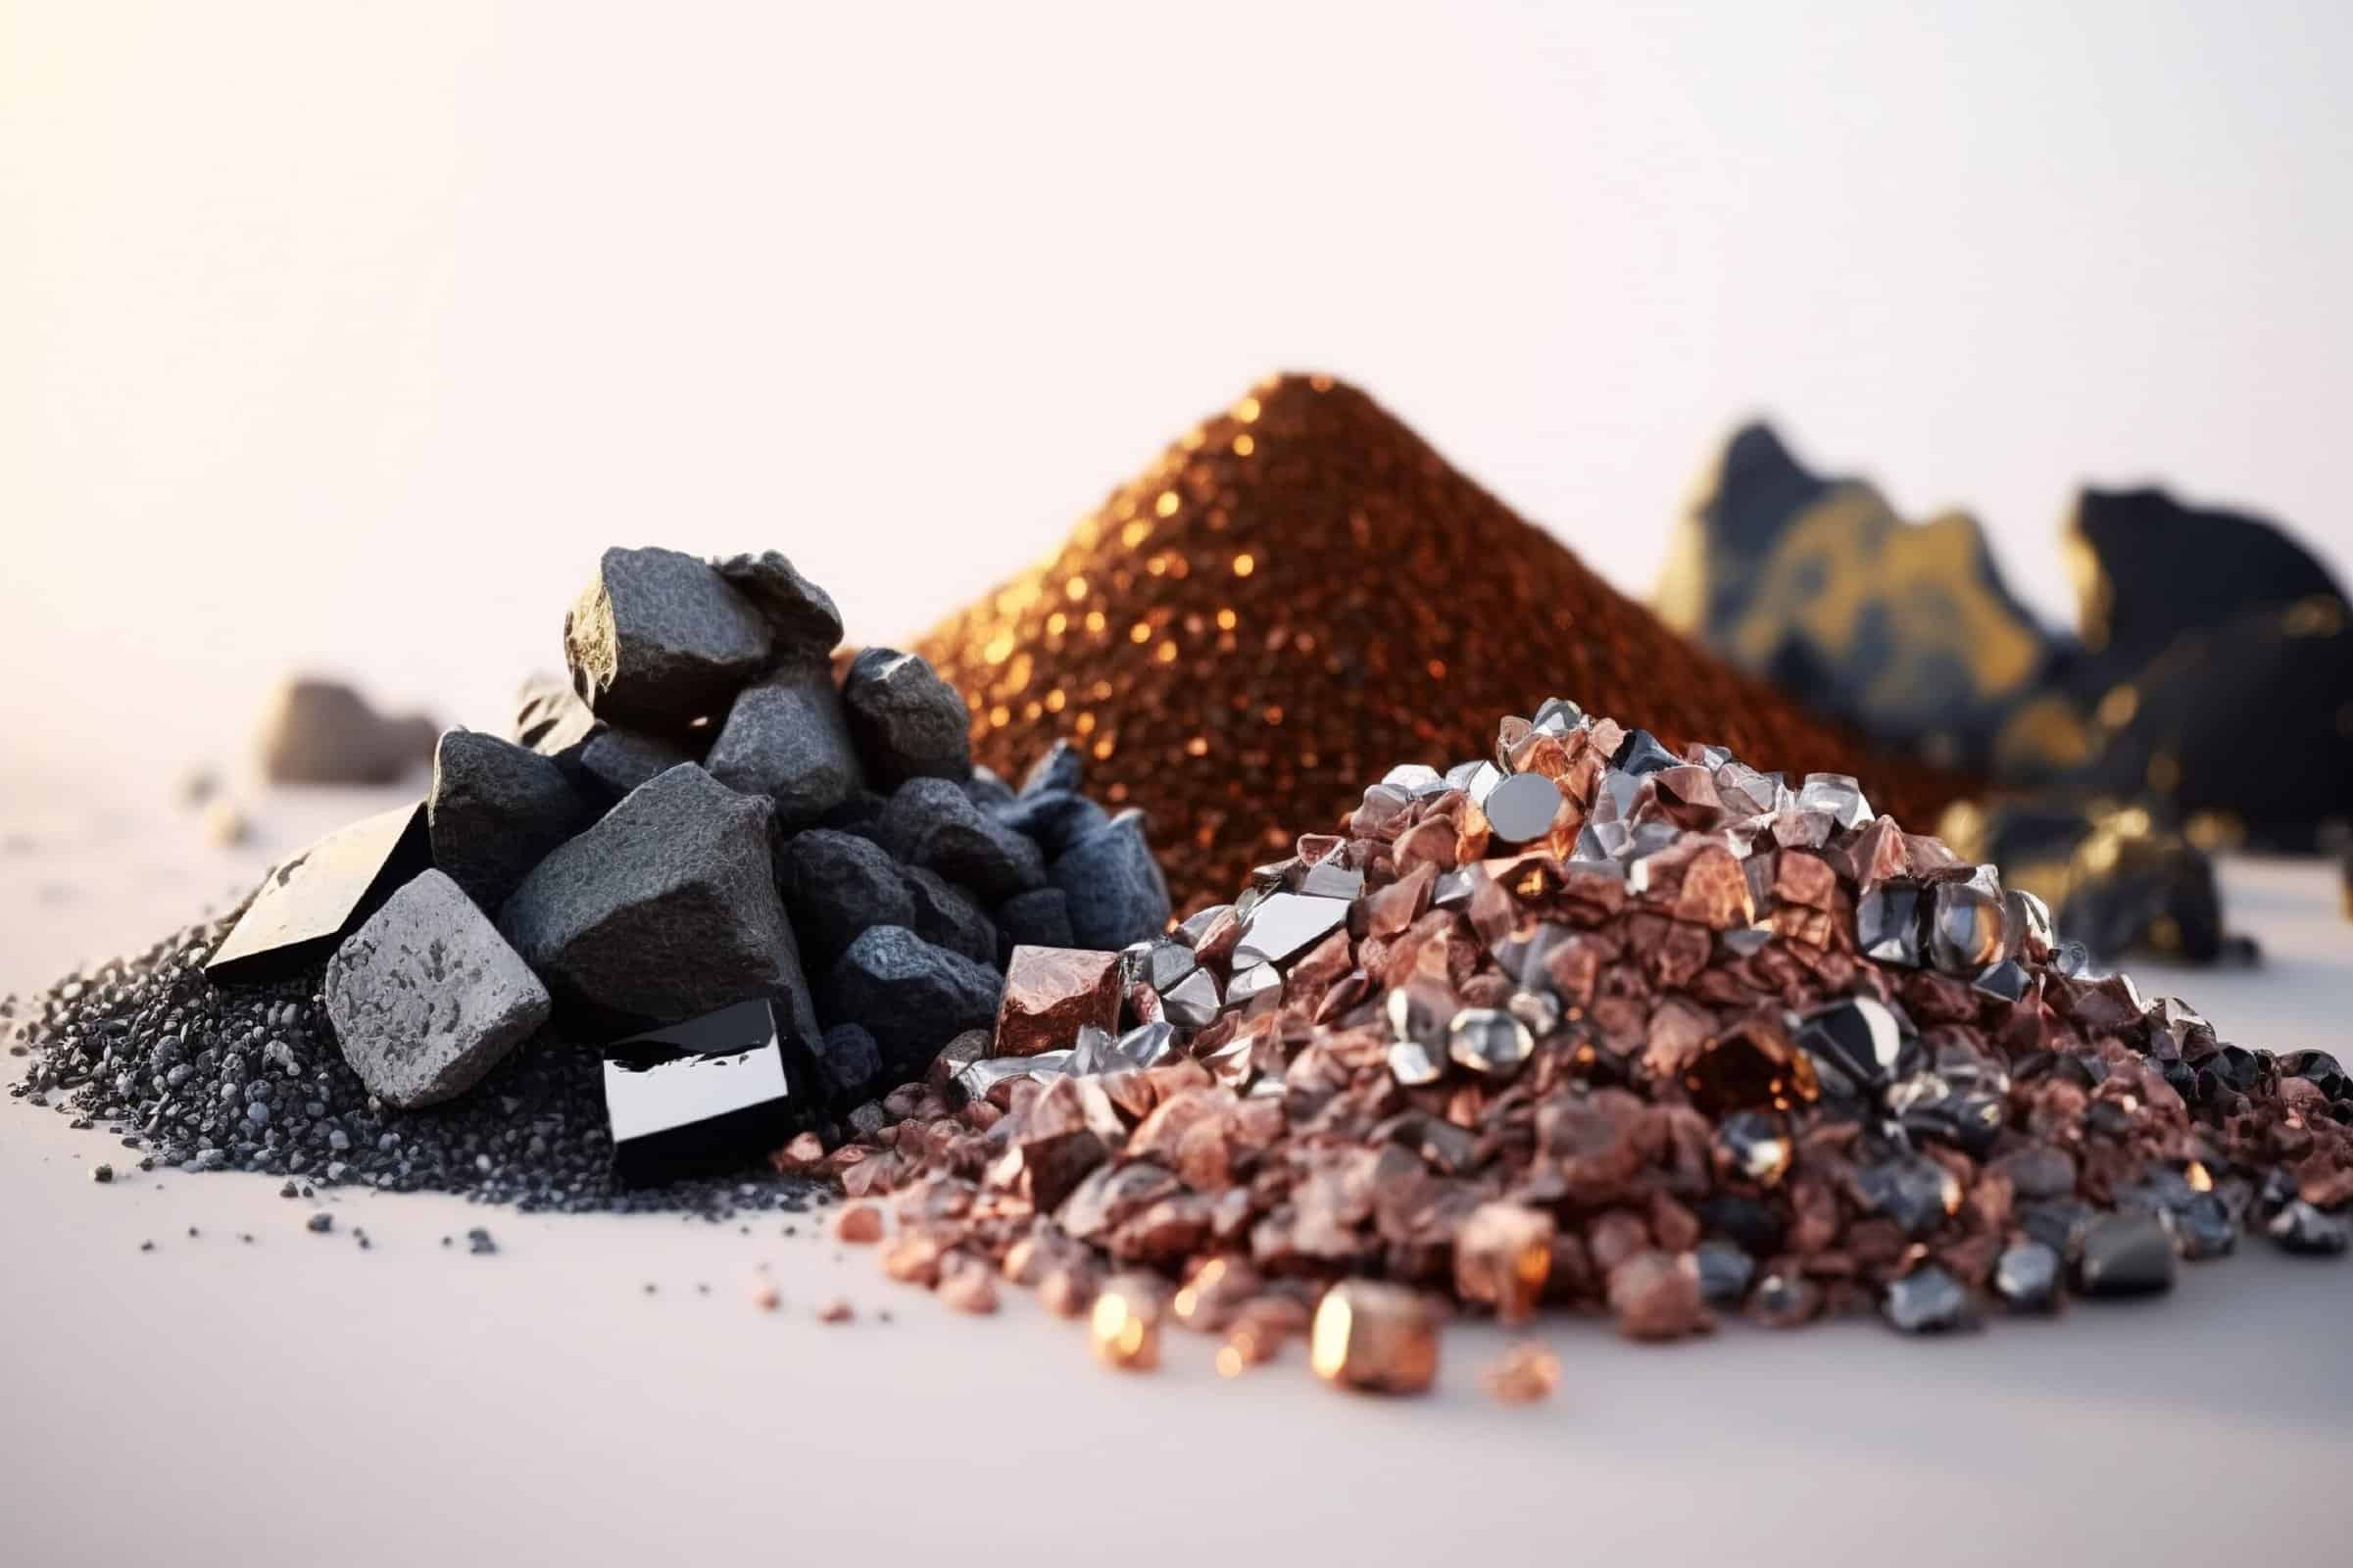 Pile of rare earth minerals.